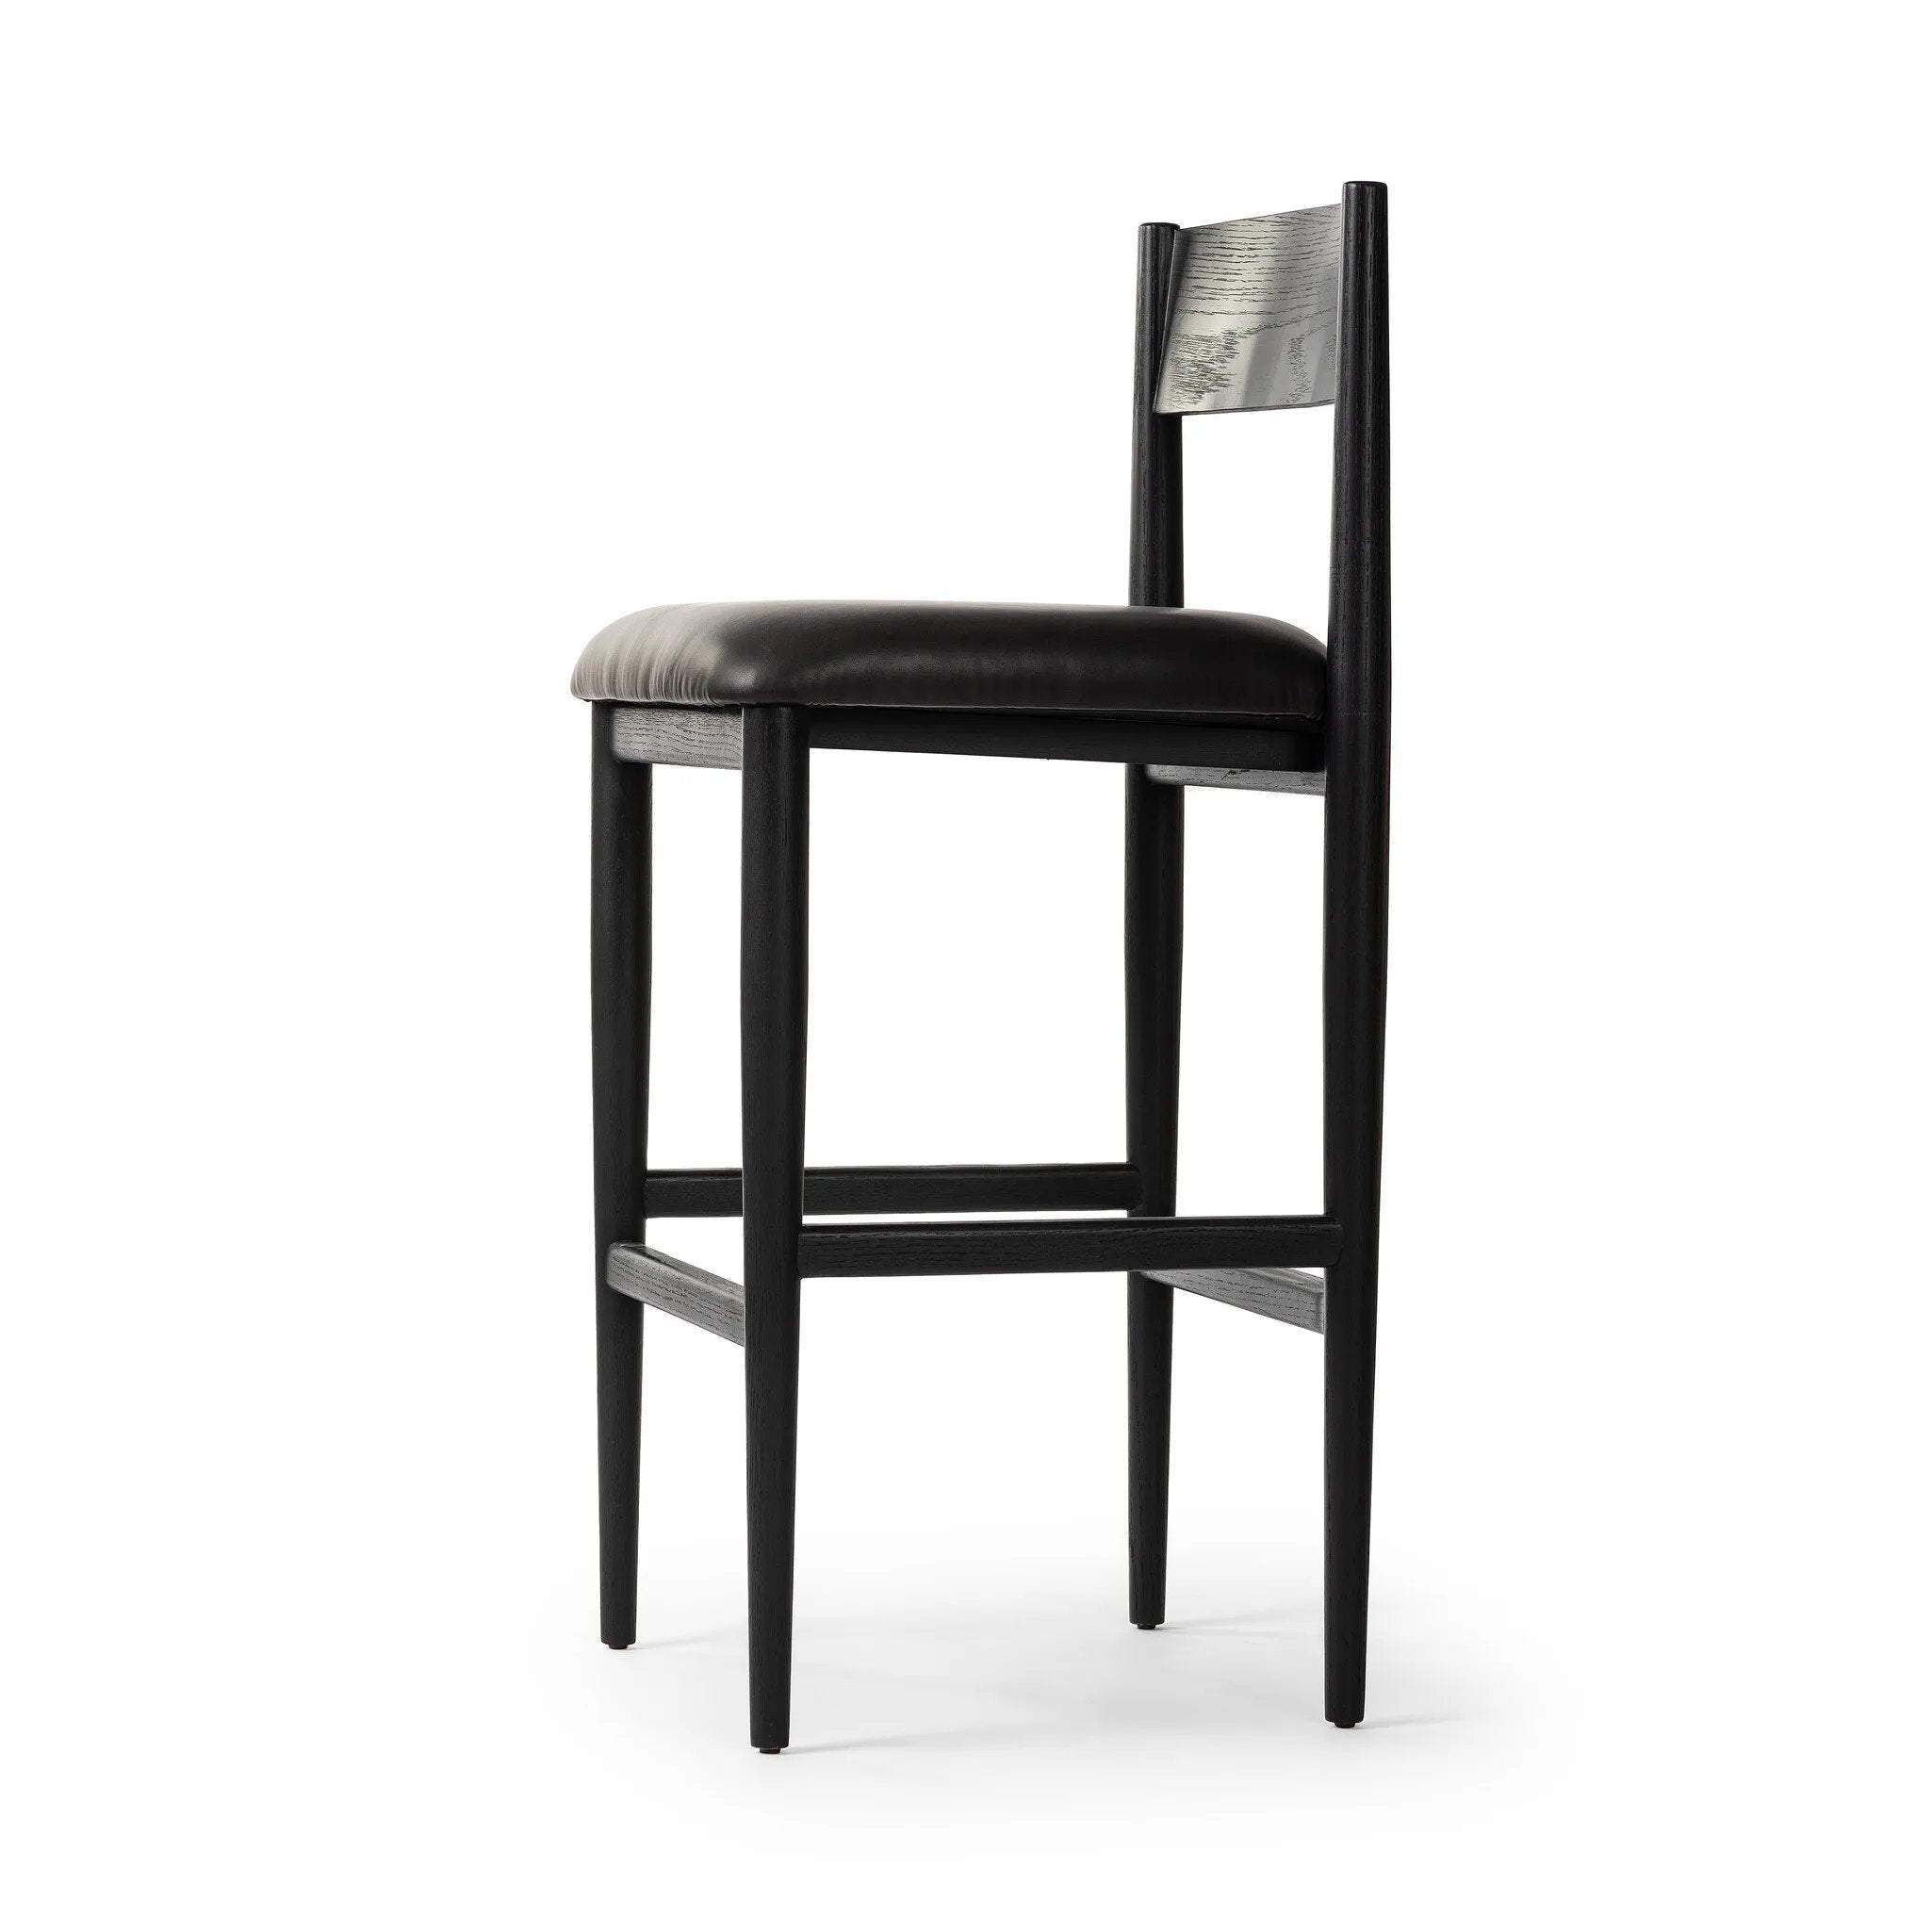 Monochromatic meets midcentury with this bar-height stool. Structured while comfortable, the tapered-leg chair pairs an ebony wood frame with a faux leather cushion.Collection: Ashfor Amethyst Home provides interior design, new home construction design consulting, vintage area rugs, and lighting in the Nashville metro area.